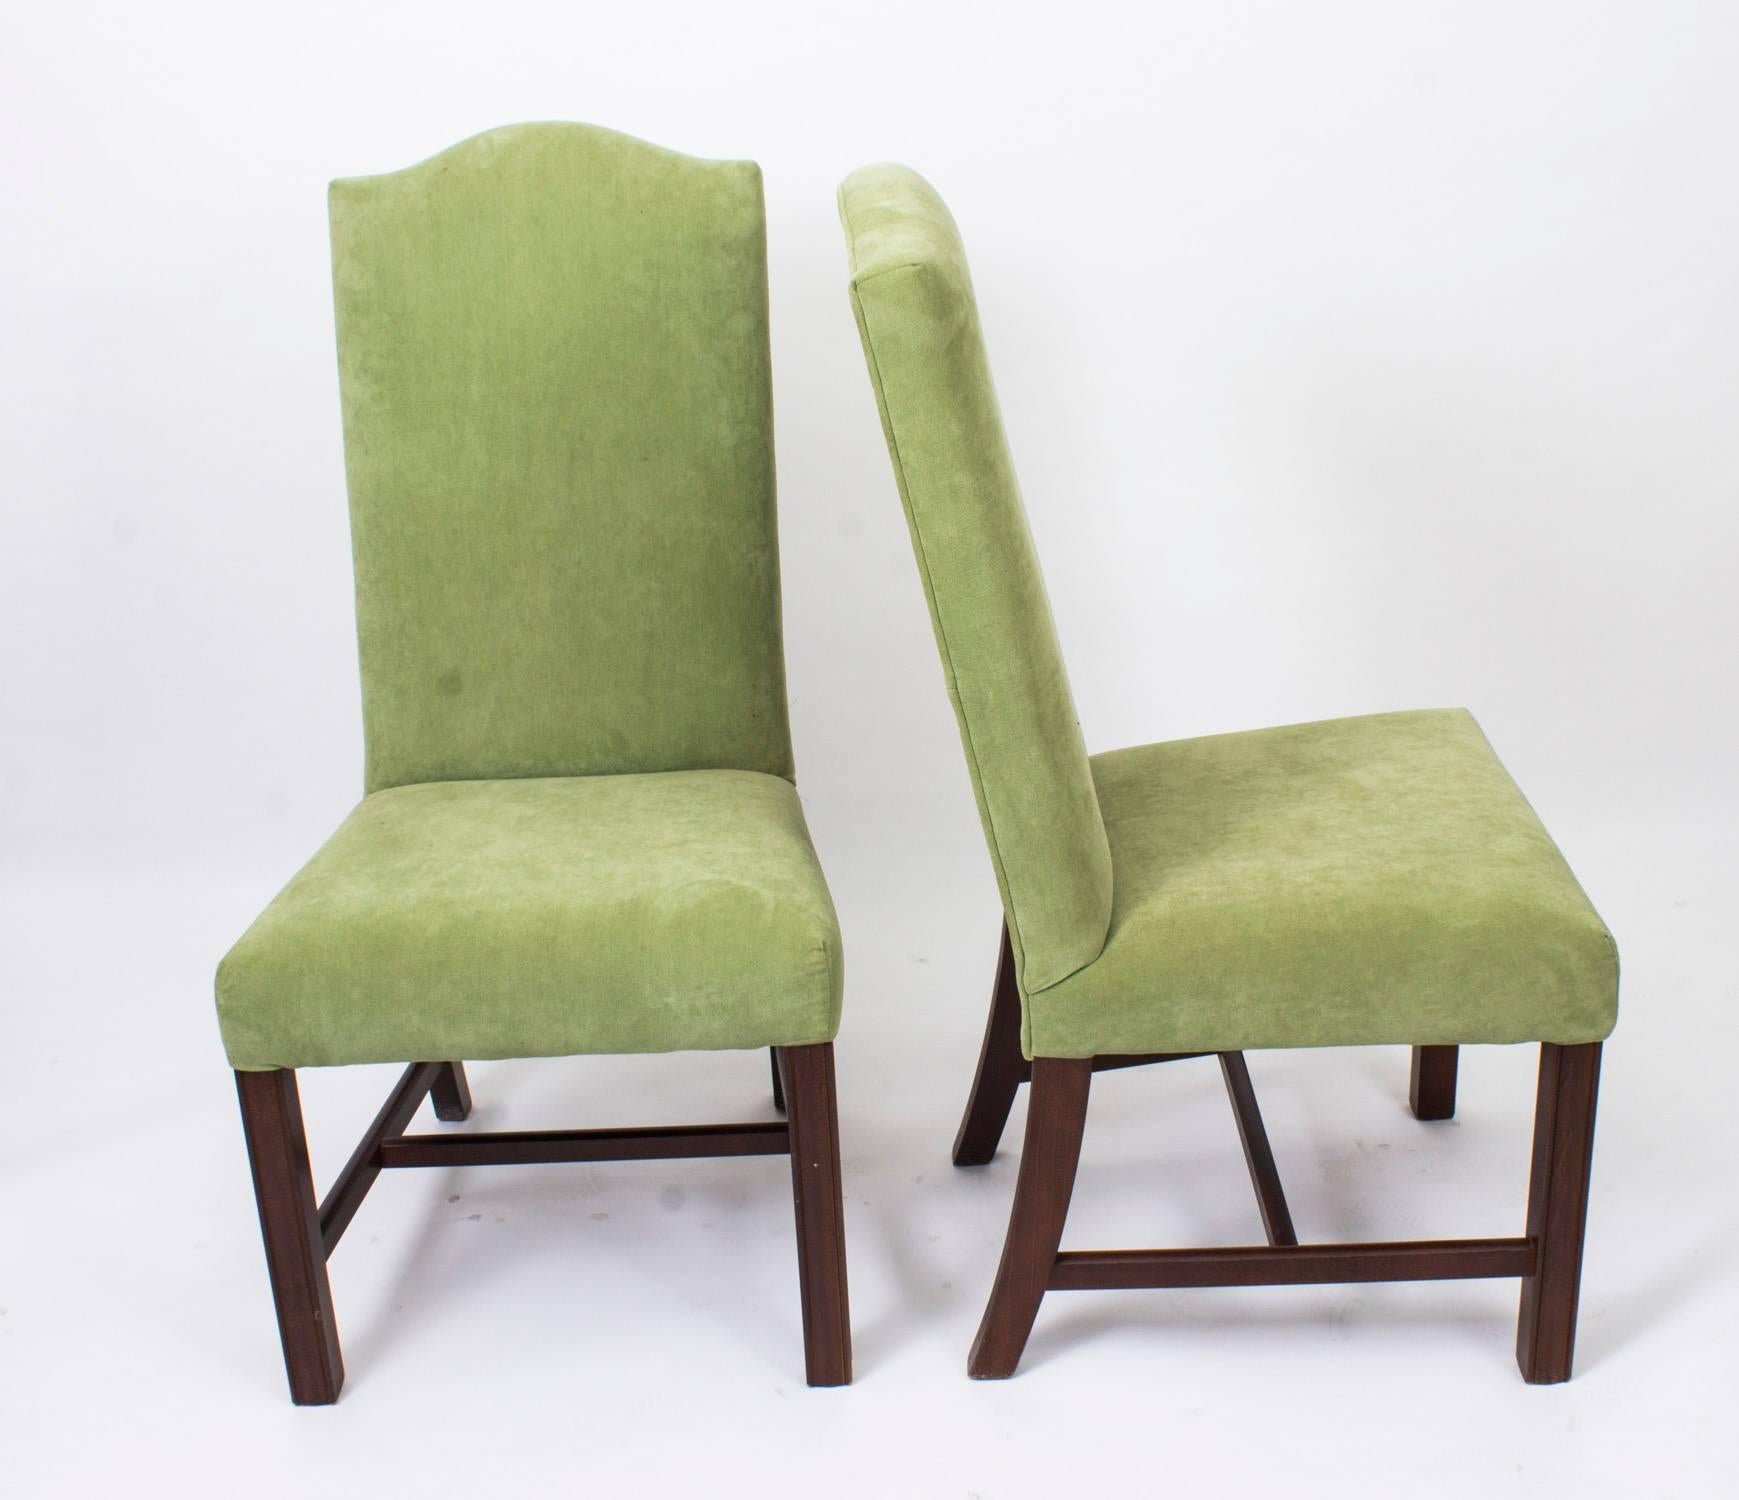 An absolutely fantastic English made set of ten padded highback dining chairs, dating from the second half of the 20th century.

These chairs have been masterfully hand crafted, and the set comprises ten side chairs all of which feature an